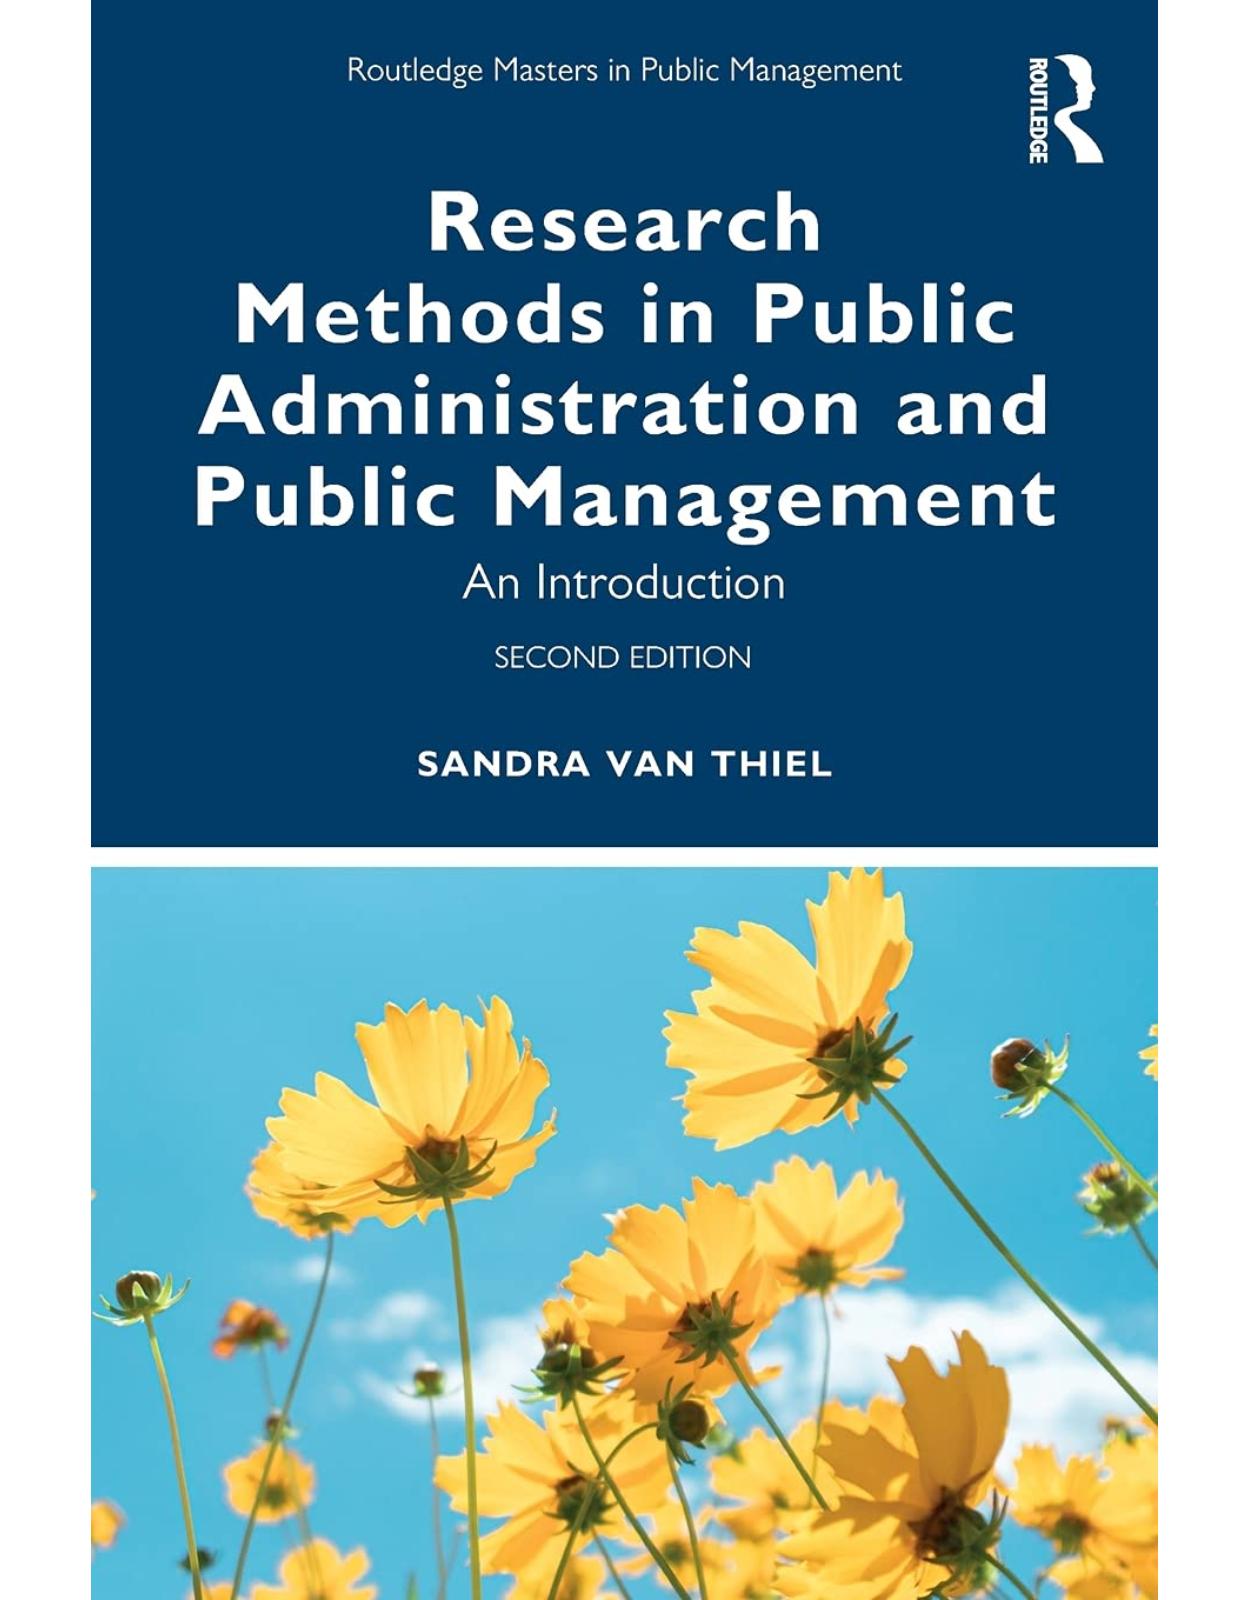 Research Methods in Public Administration and Public Management: An Introduction (Routledge Masters in Public Management) 